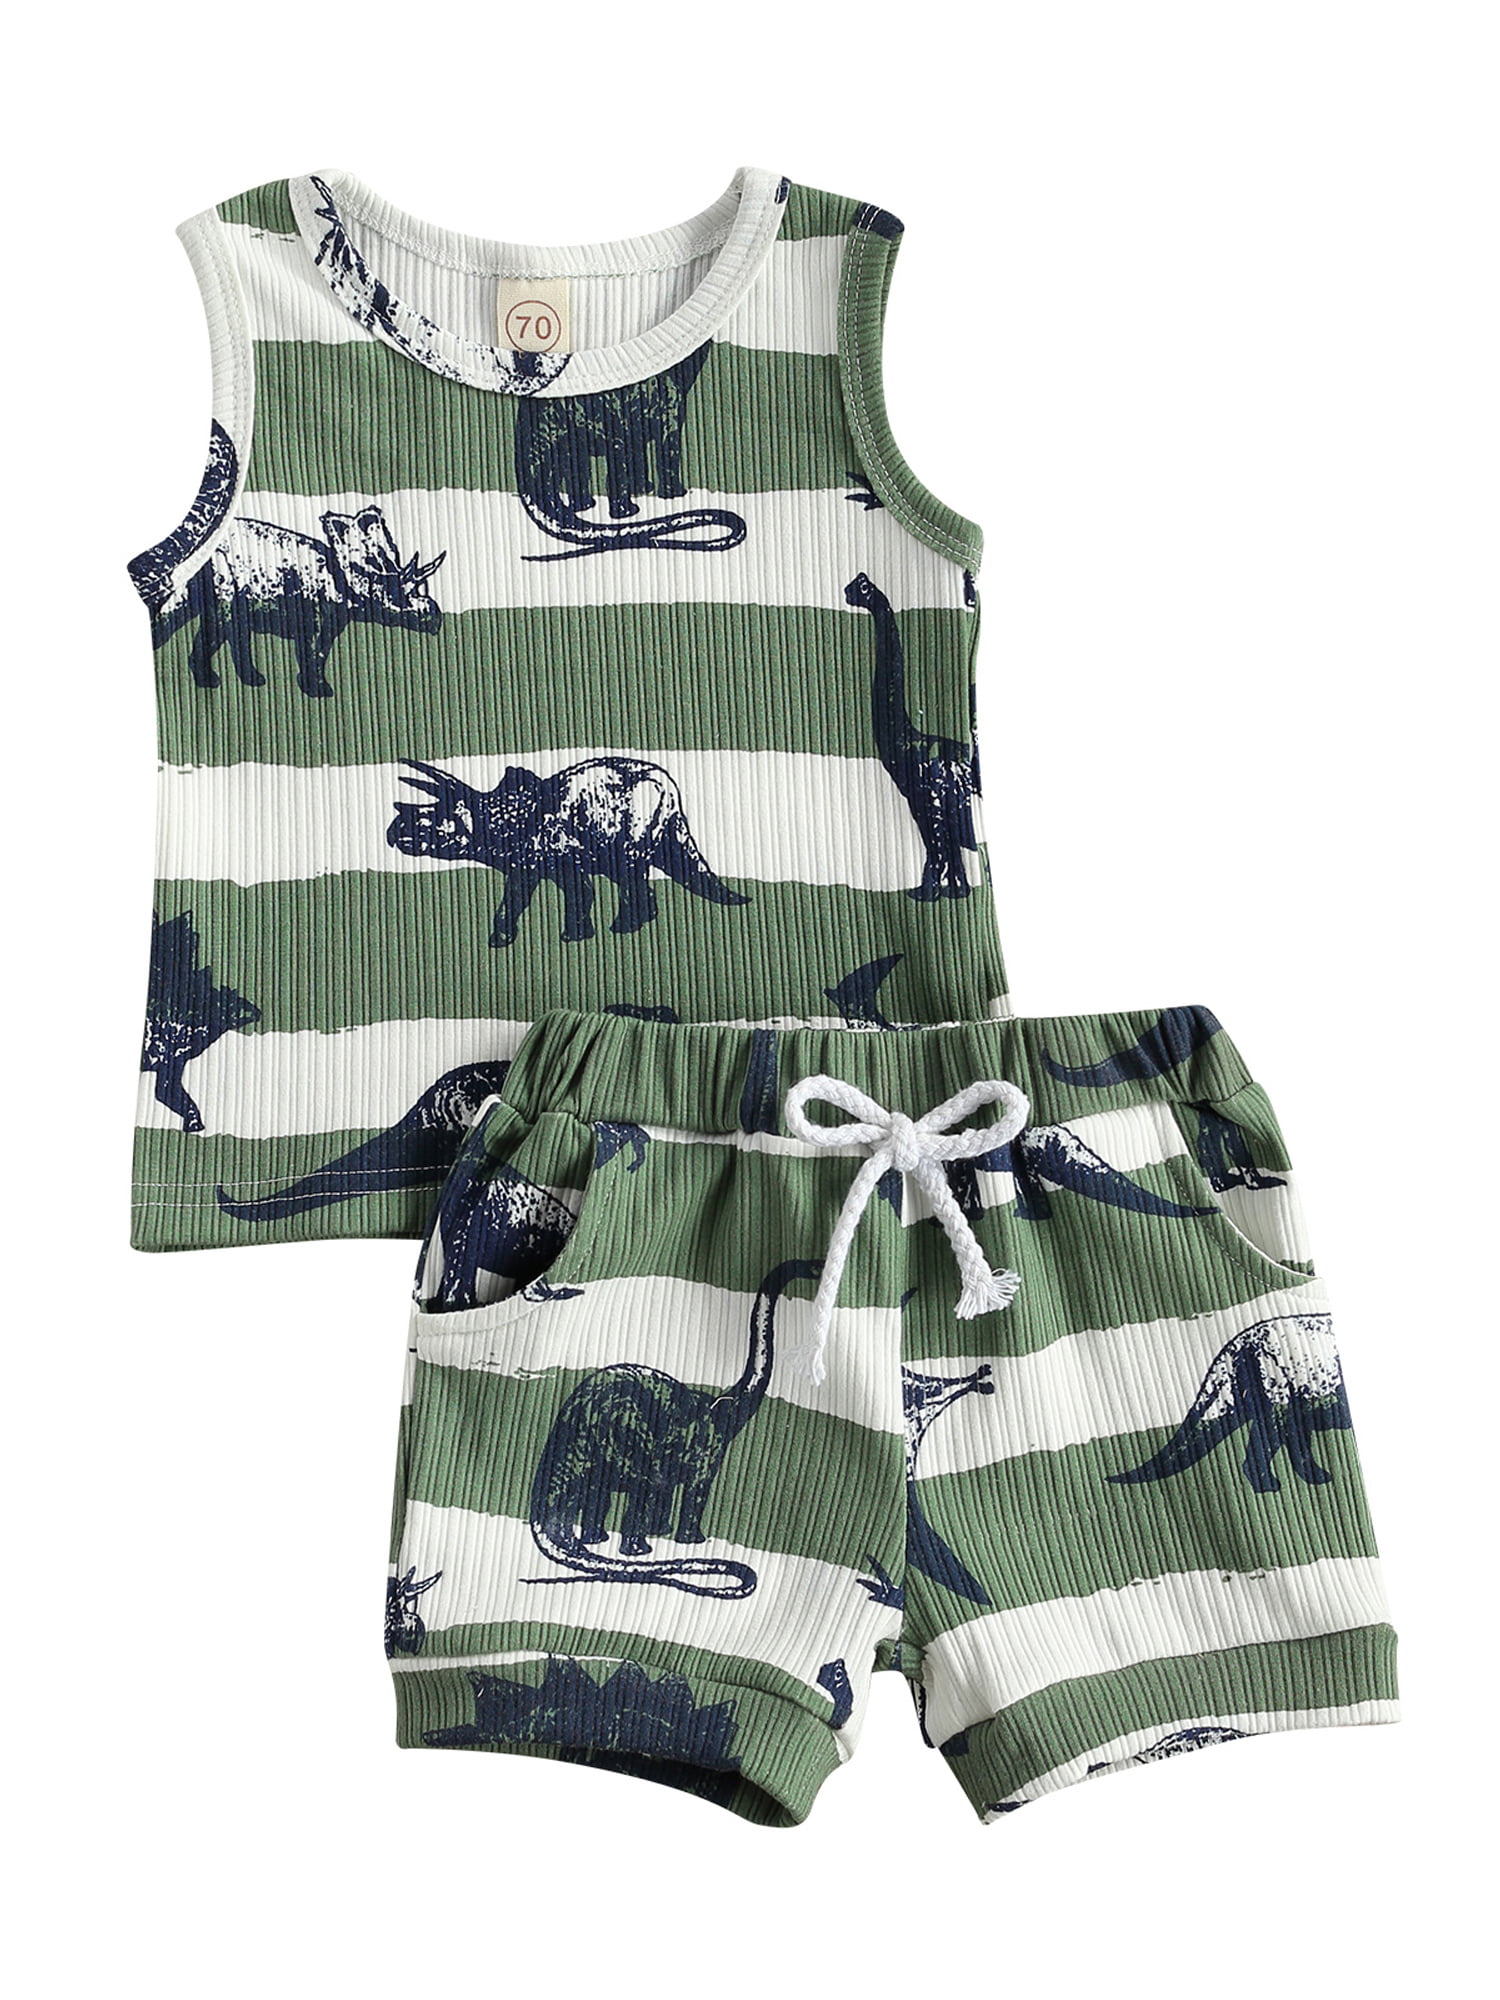 Details about   2PCS Child Baby Boys Outfits Sleeveless Vest Tops+Camouflage Pants Clothes Set 